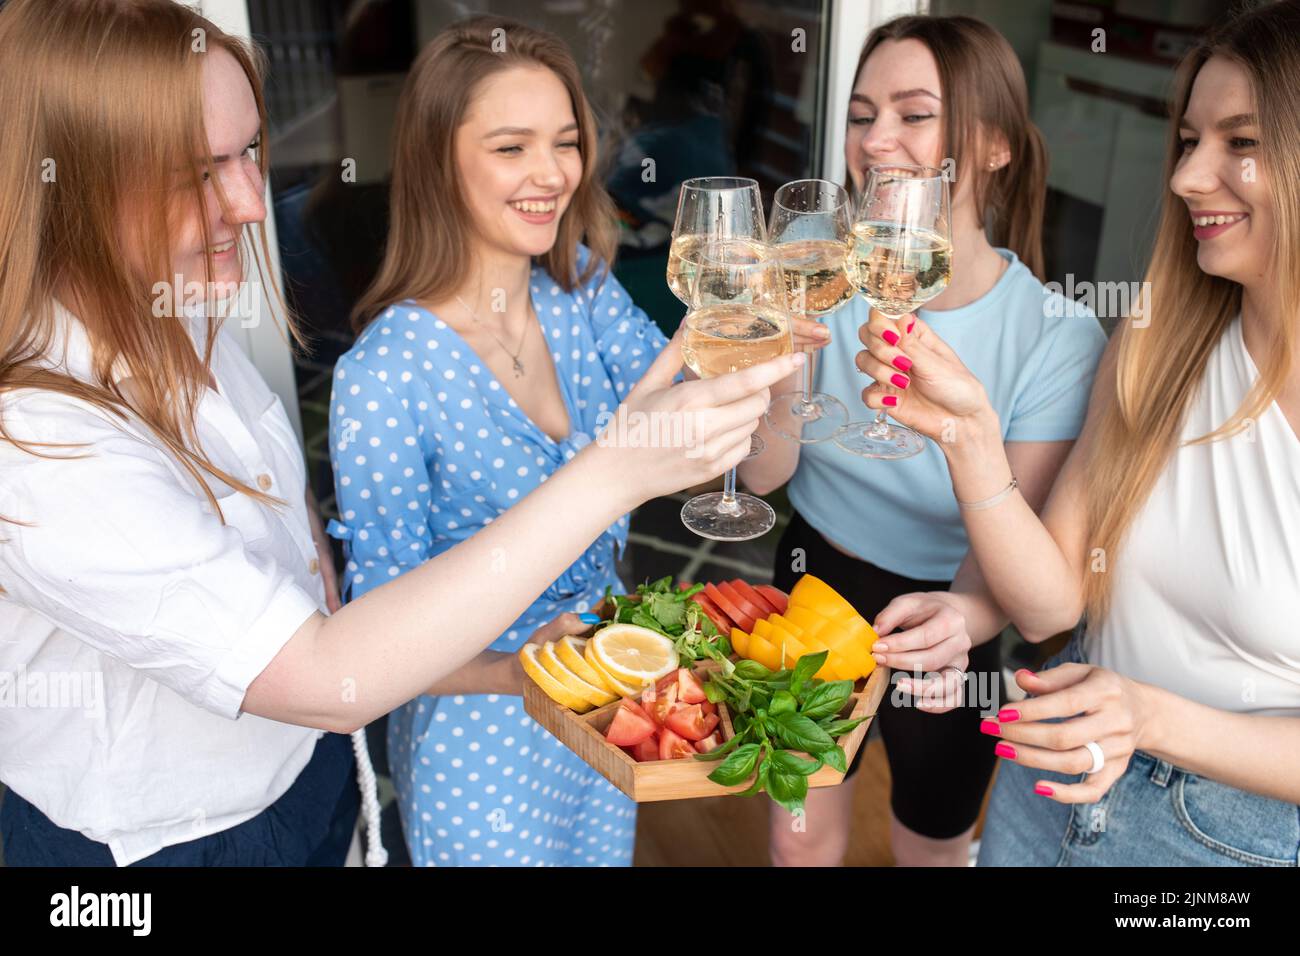 Portrait of young joyful amazing women holding vegetables, clinking glasses of white wine, standing near house. Party. Stock Photo